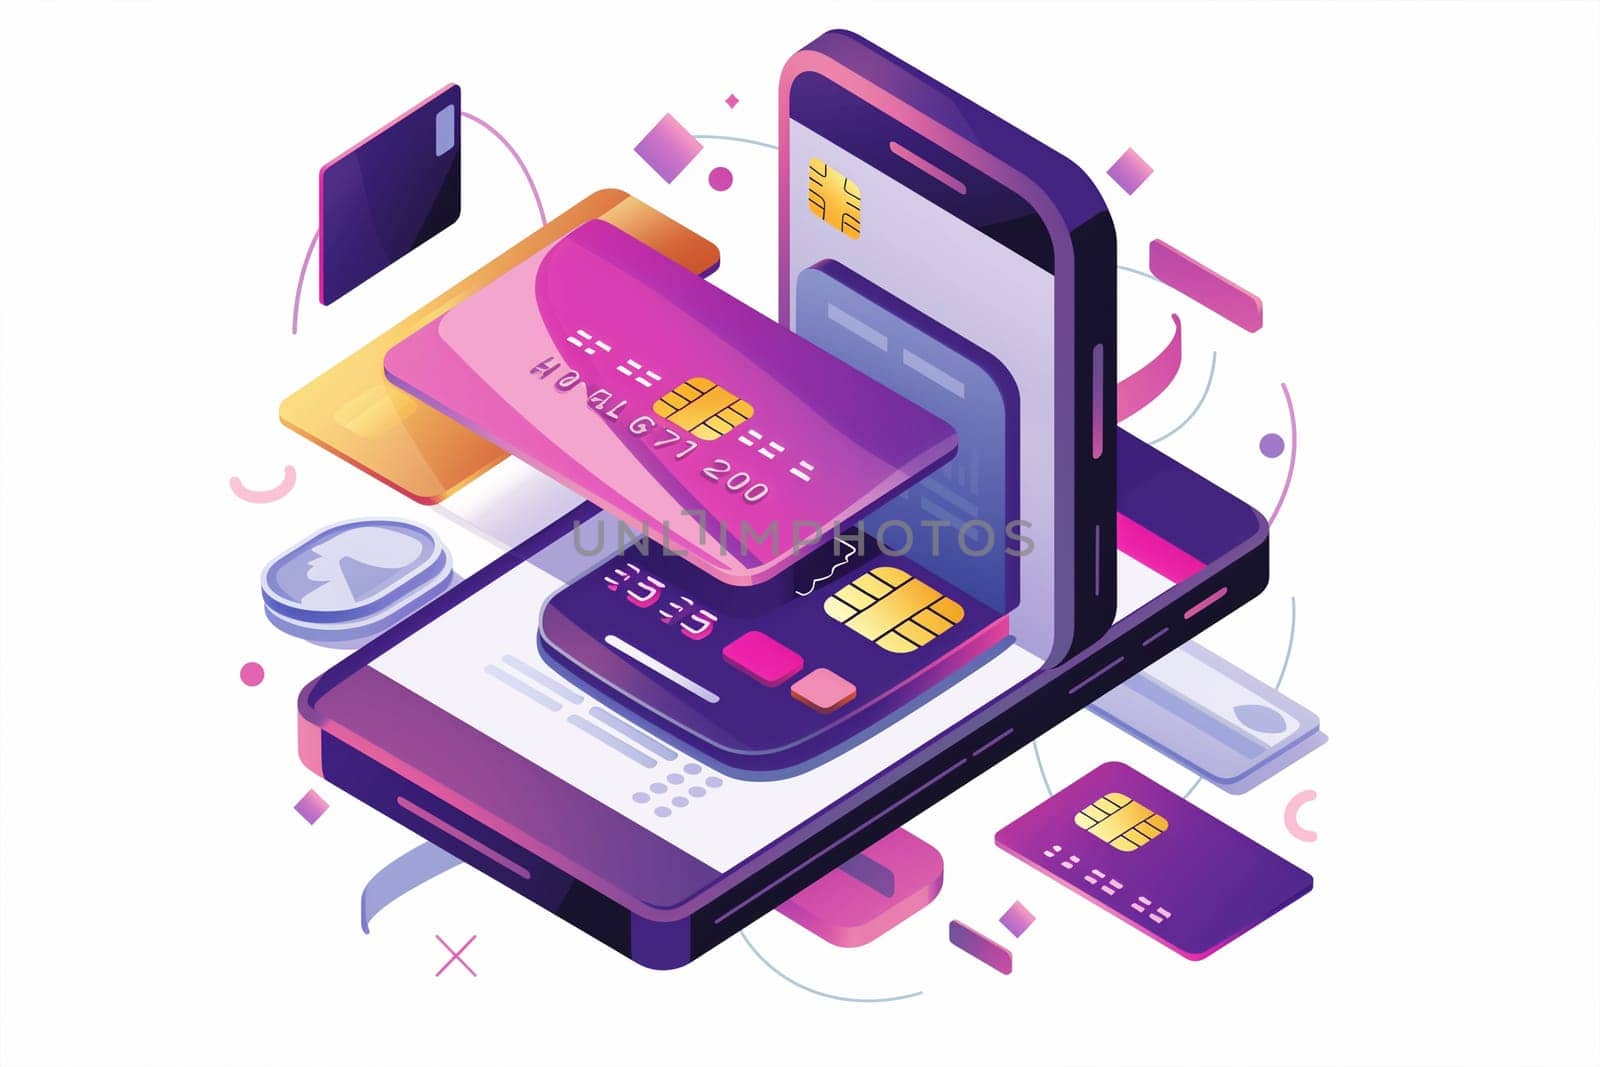 Isometric view of a modern mobile phone with multiple credit cards placed on its screen.